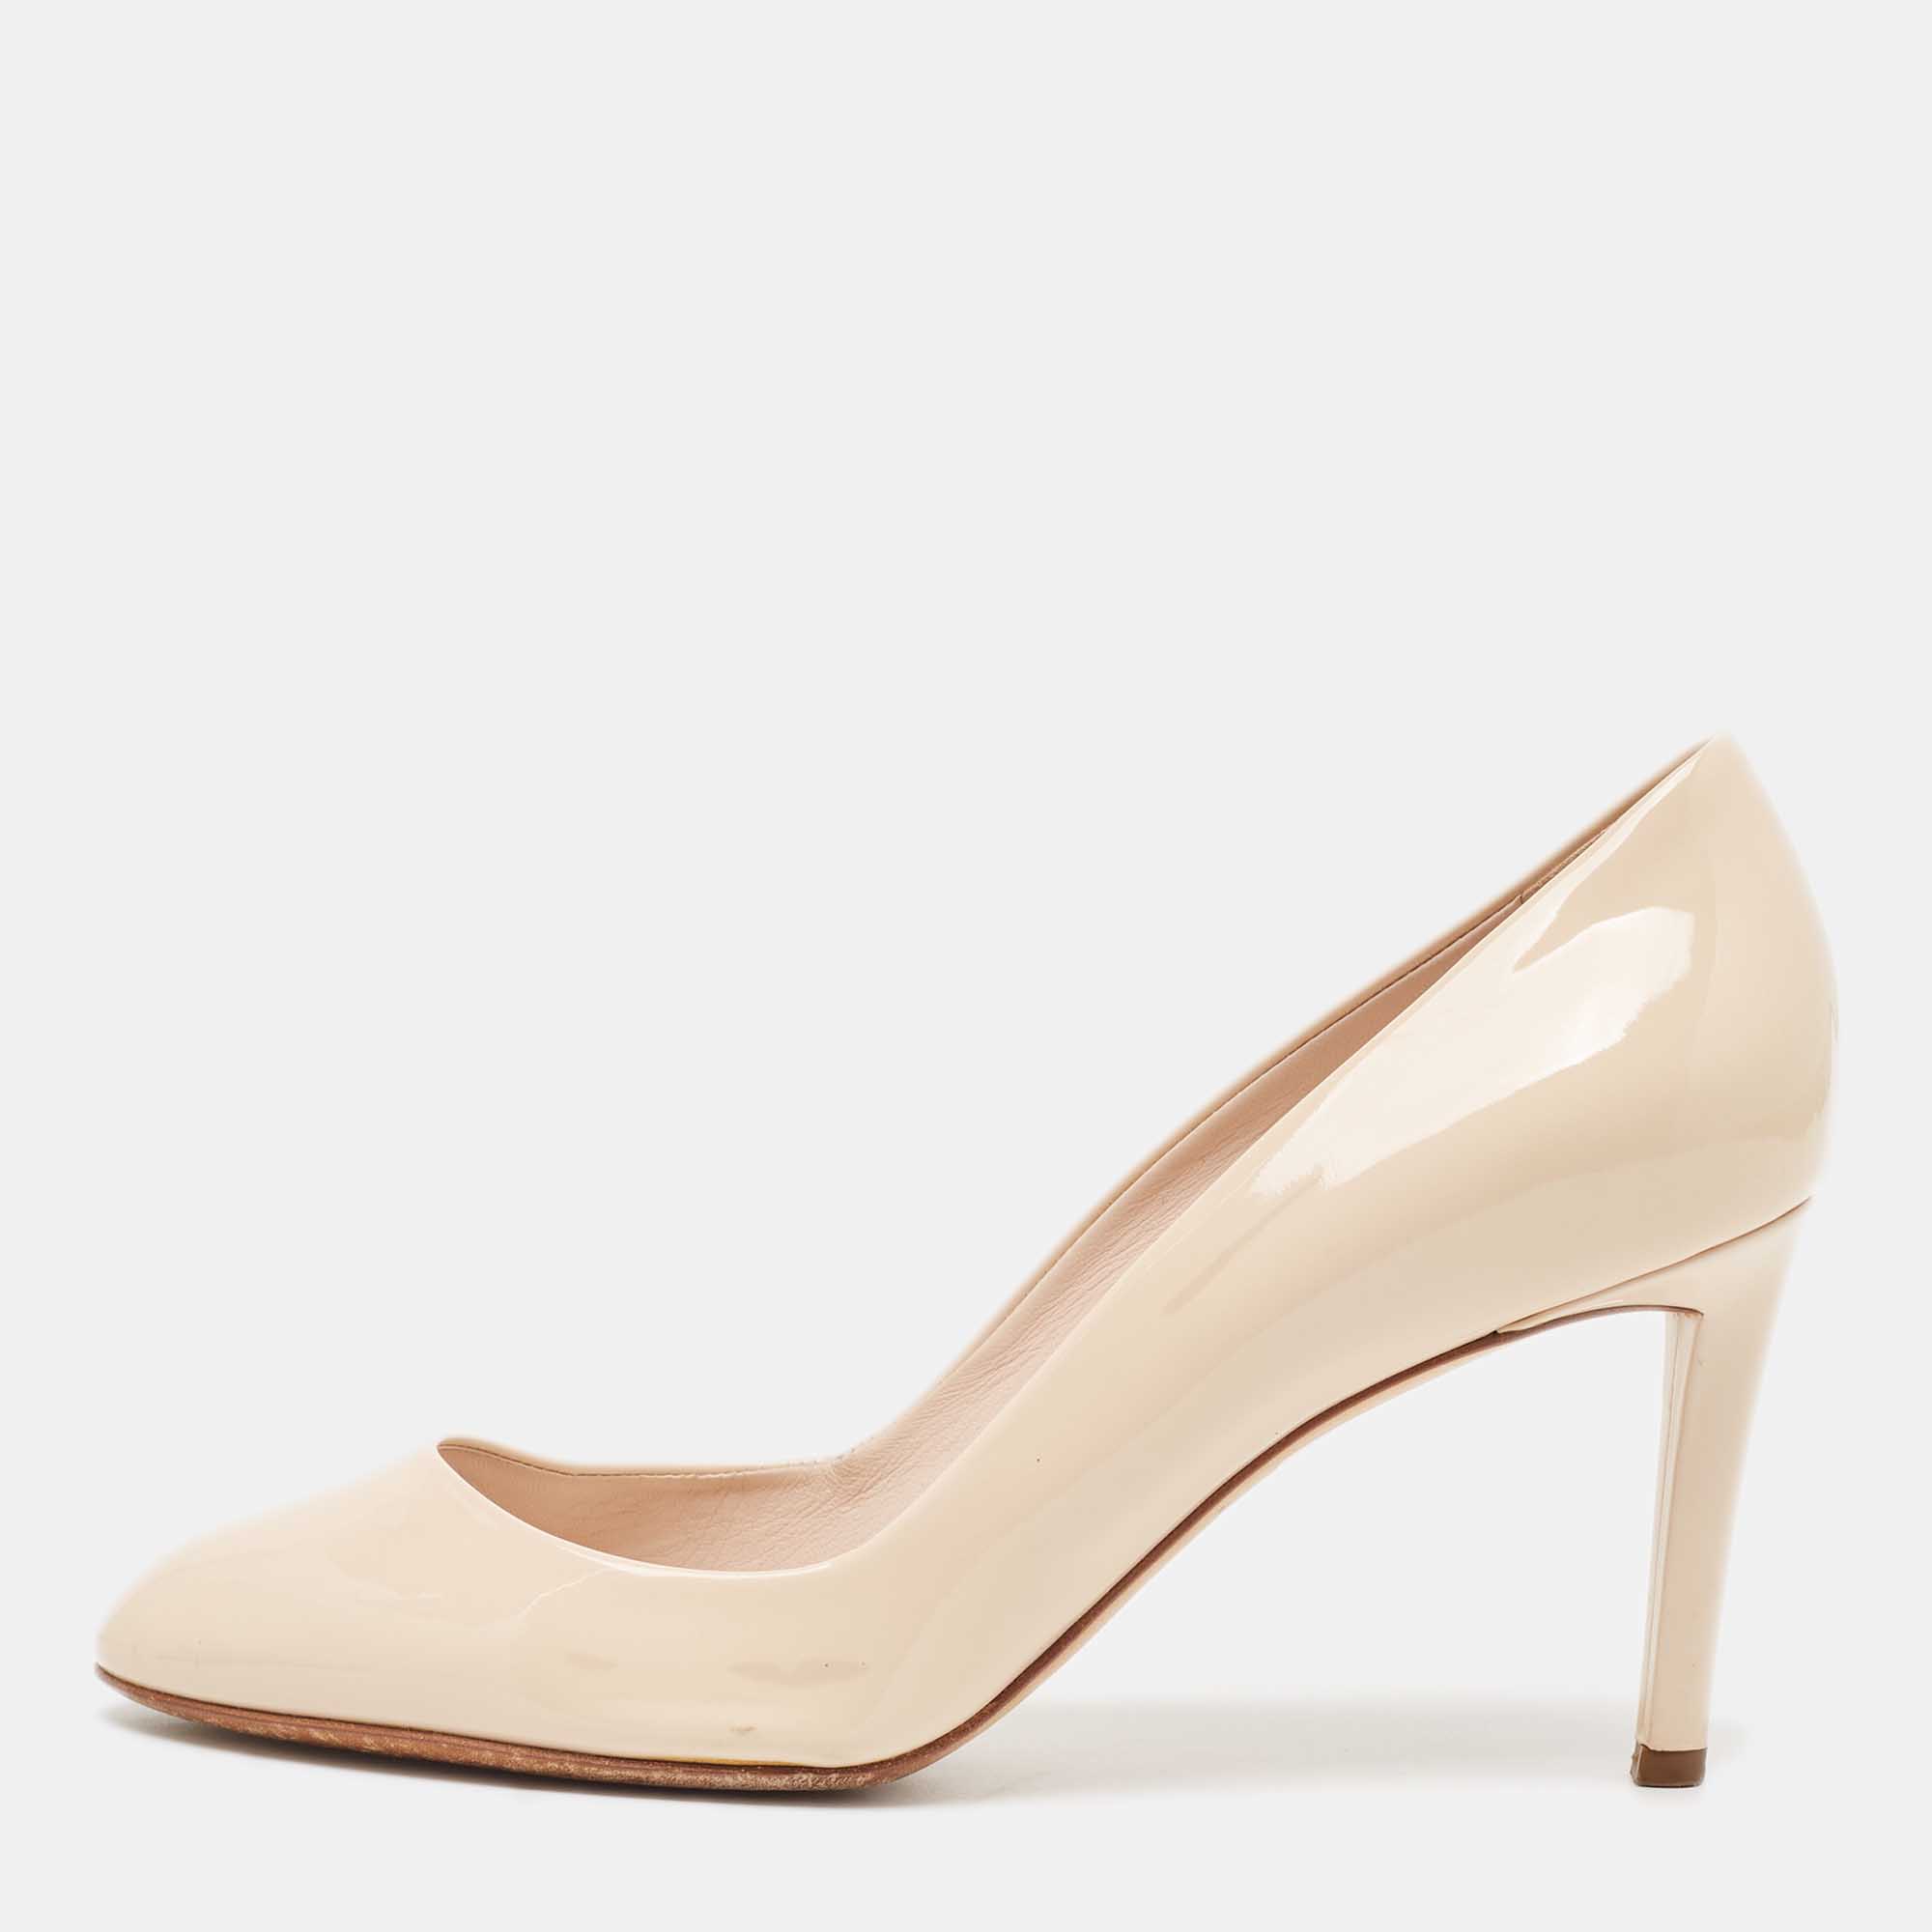 Dior beige patent leather round toe pumps size 38